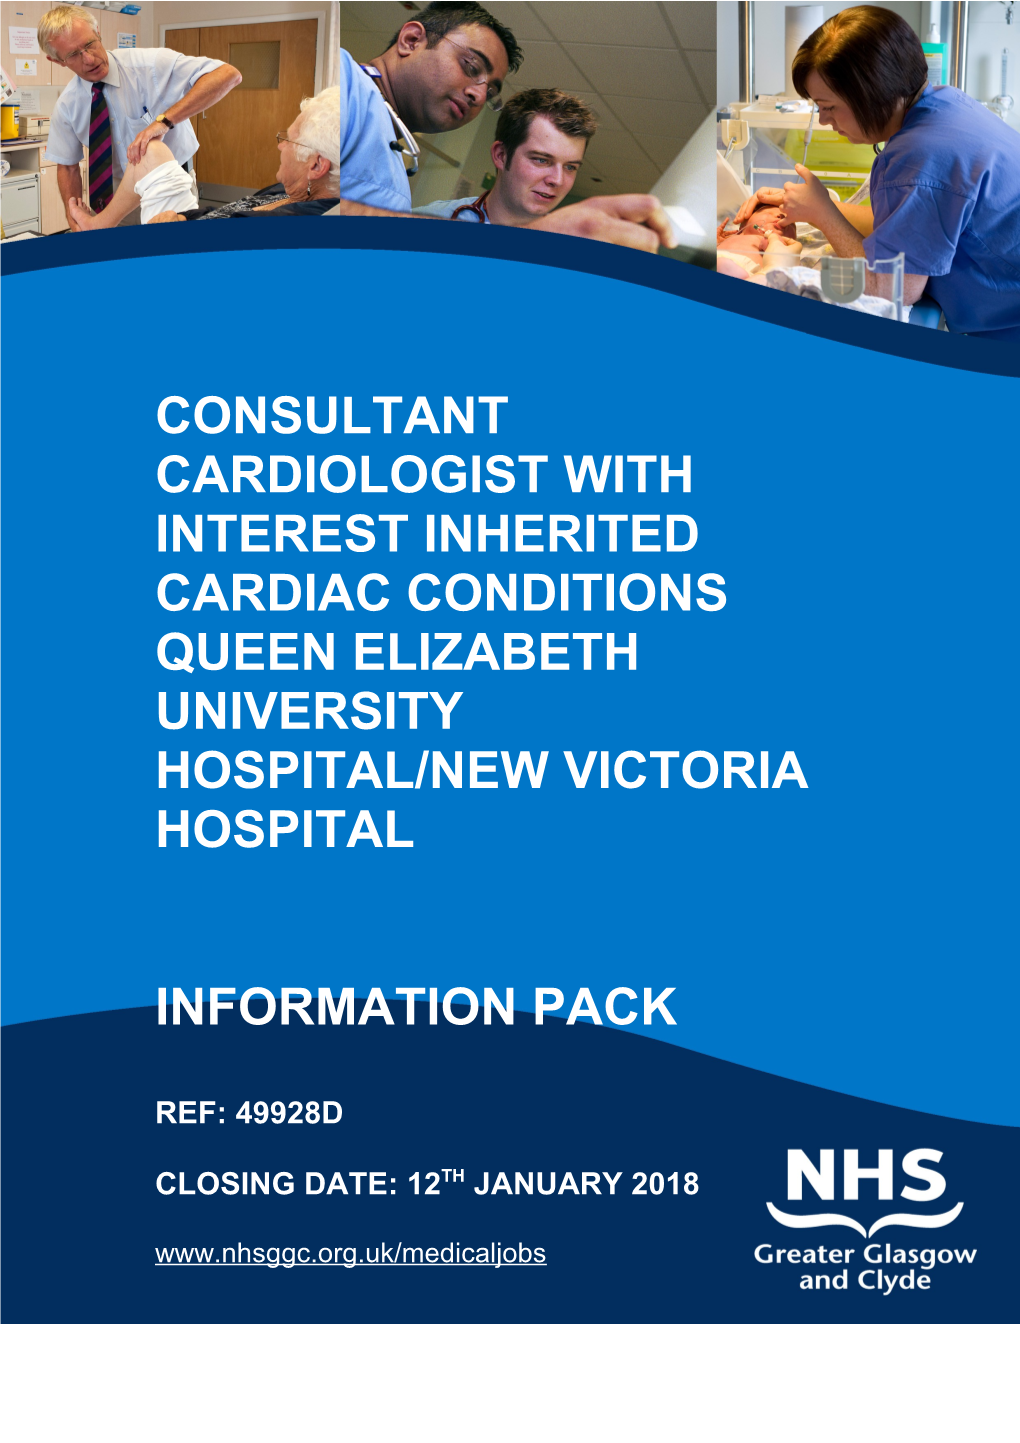 Consultant Cardiologist with Interest Inherited Cardiac Conditions